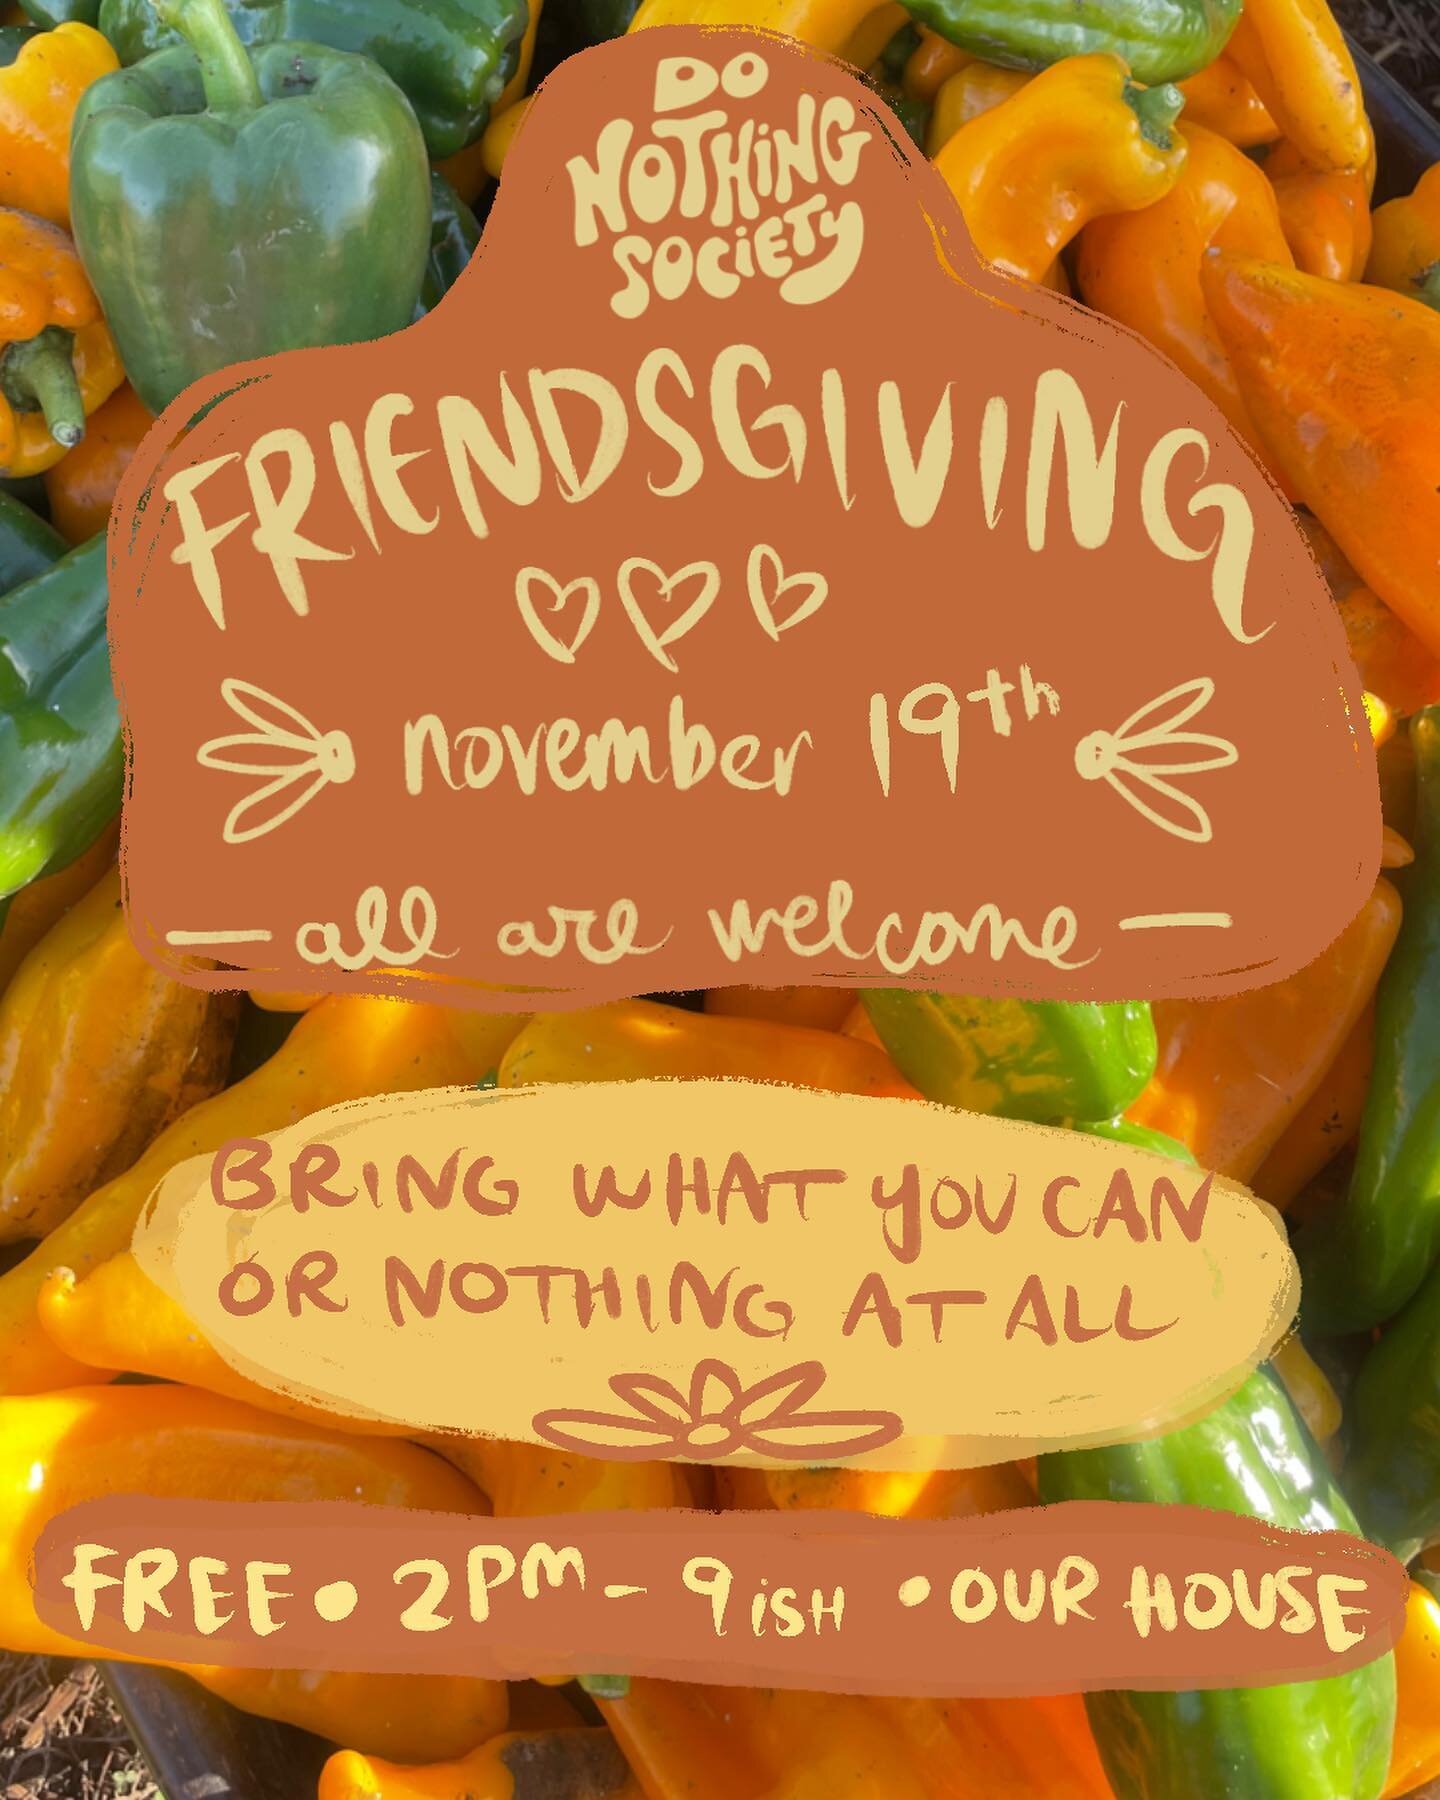 friendsgiving &amp; white elephant exchange &amp; free store &amp; art also
Sunday 2-9ish :) 
all are welcome 
1606 27th st Arcata

The holidays are weird and this year&rsquo;s been especially difficult for many of us, hoping to just offer a little s